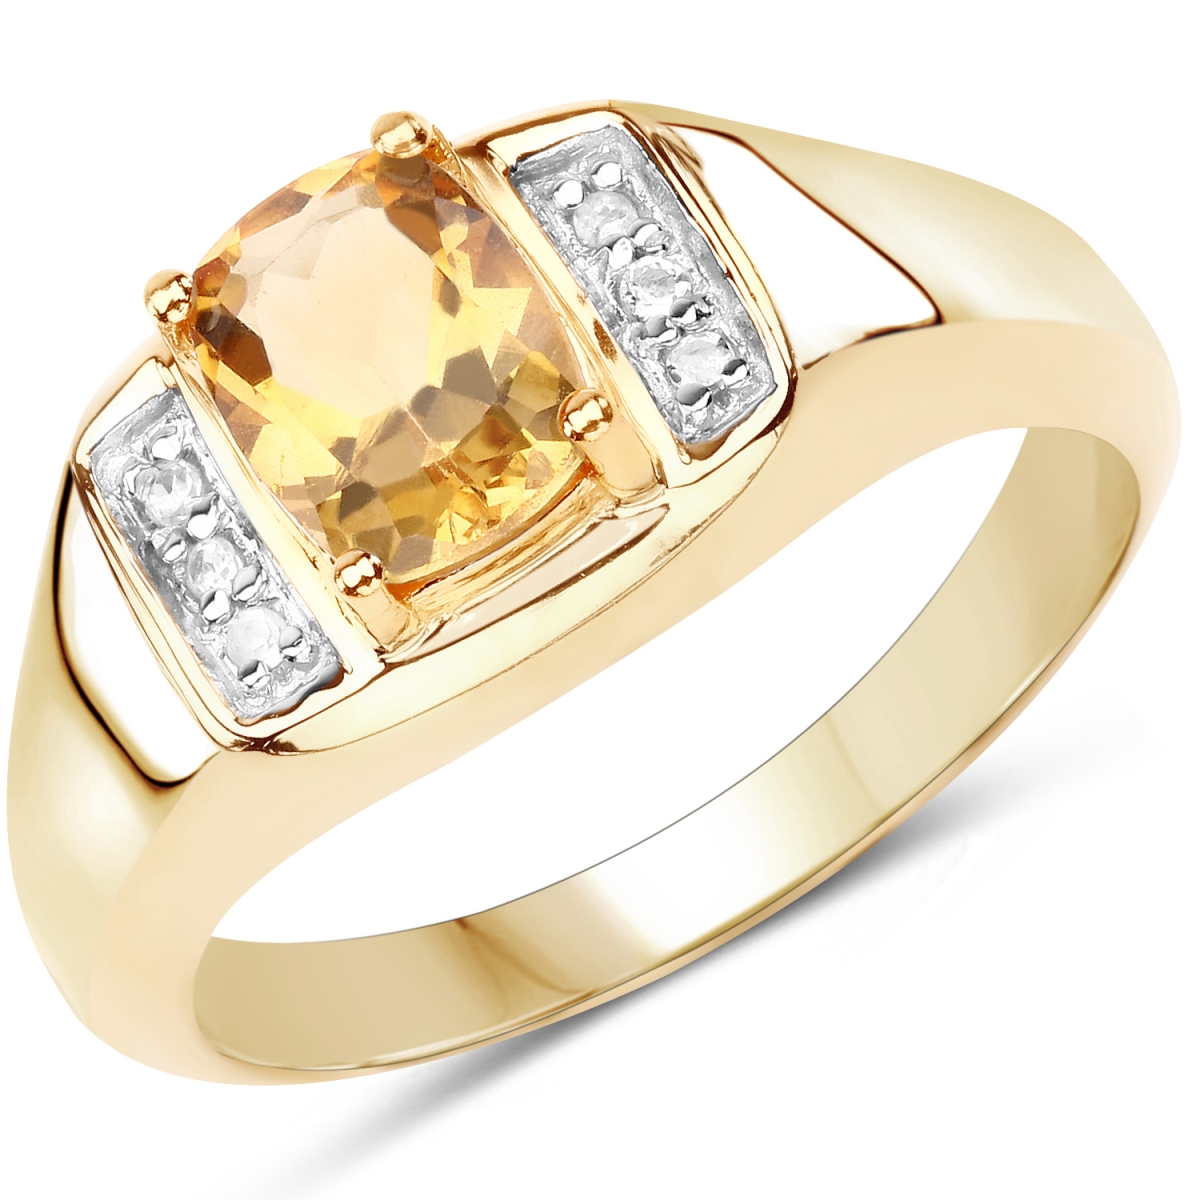 Picture of Malaika QR9437MCWT-SS14KY-13 14K Yellow Gold Plated 1.36 Carat Genuine Citrine & White Topaz 0.925 Sterling Silver Ring